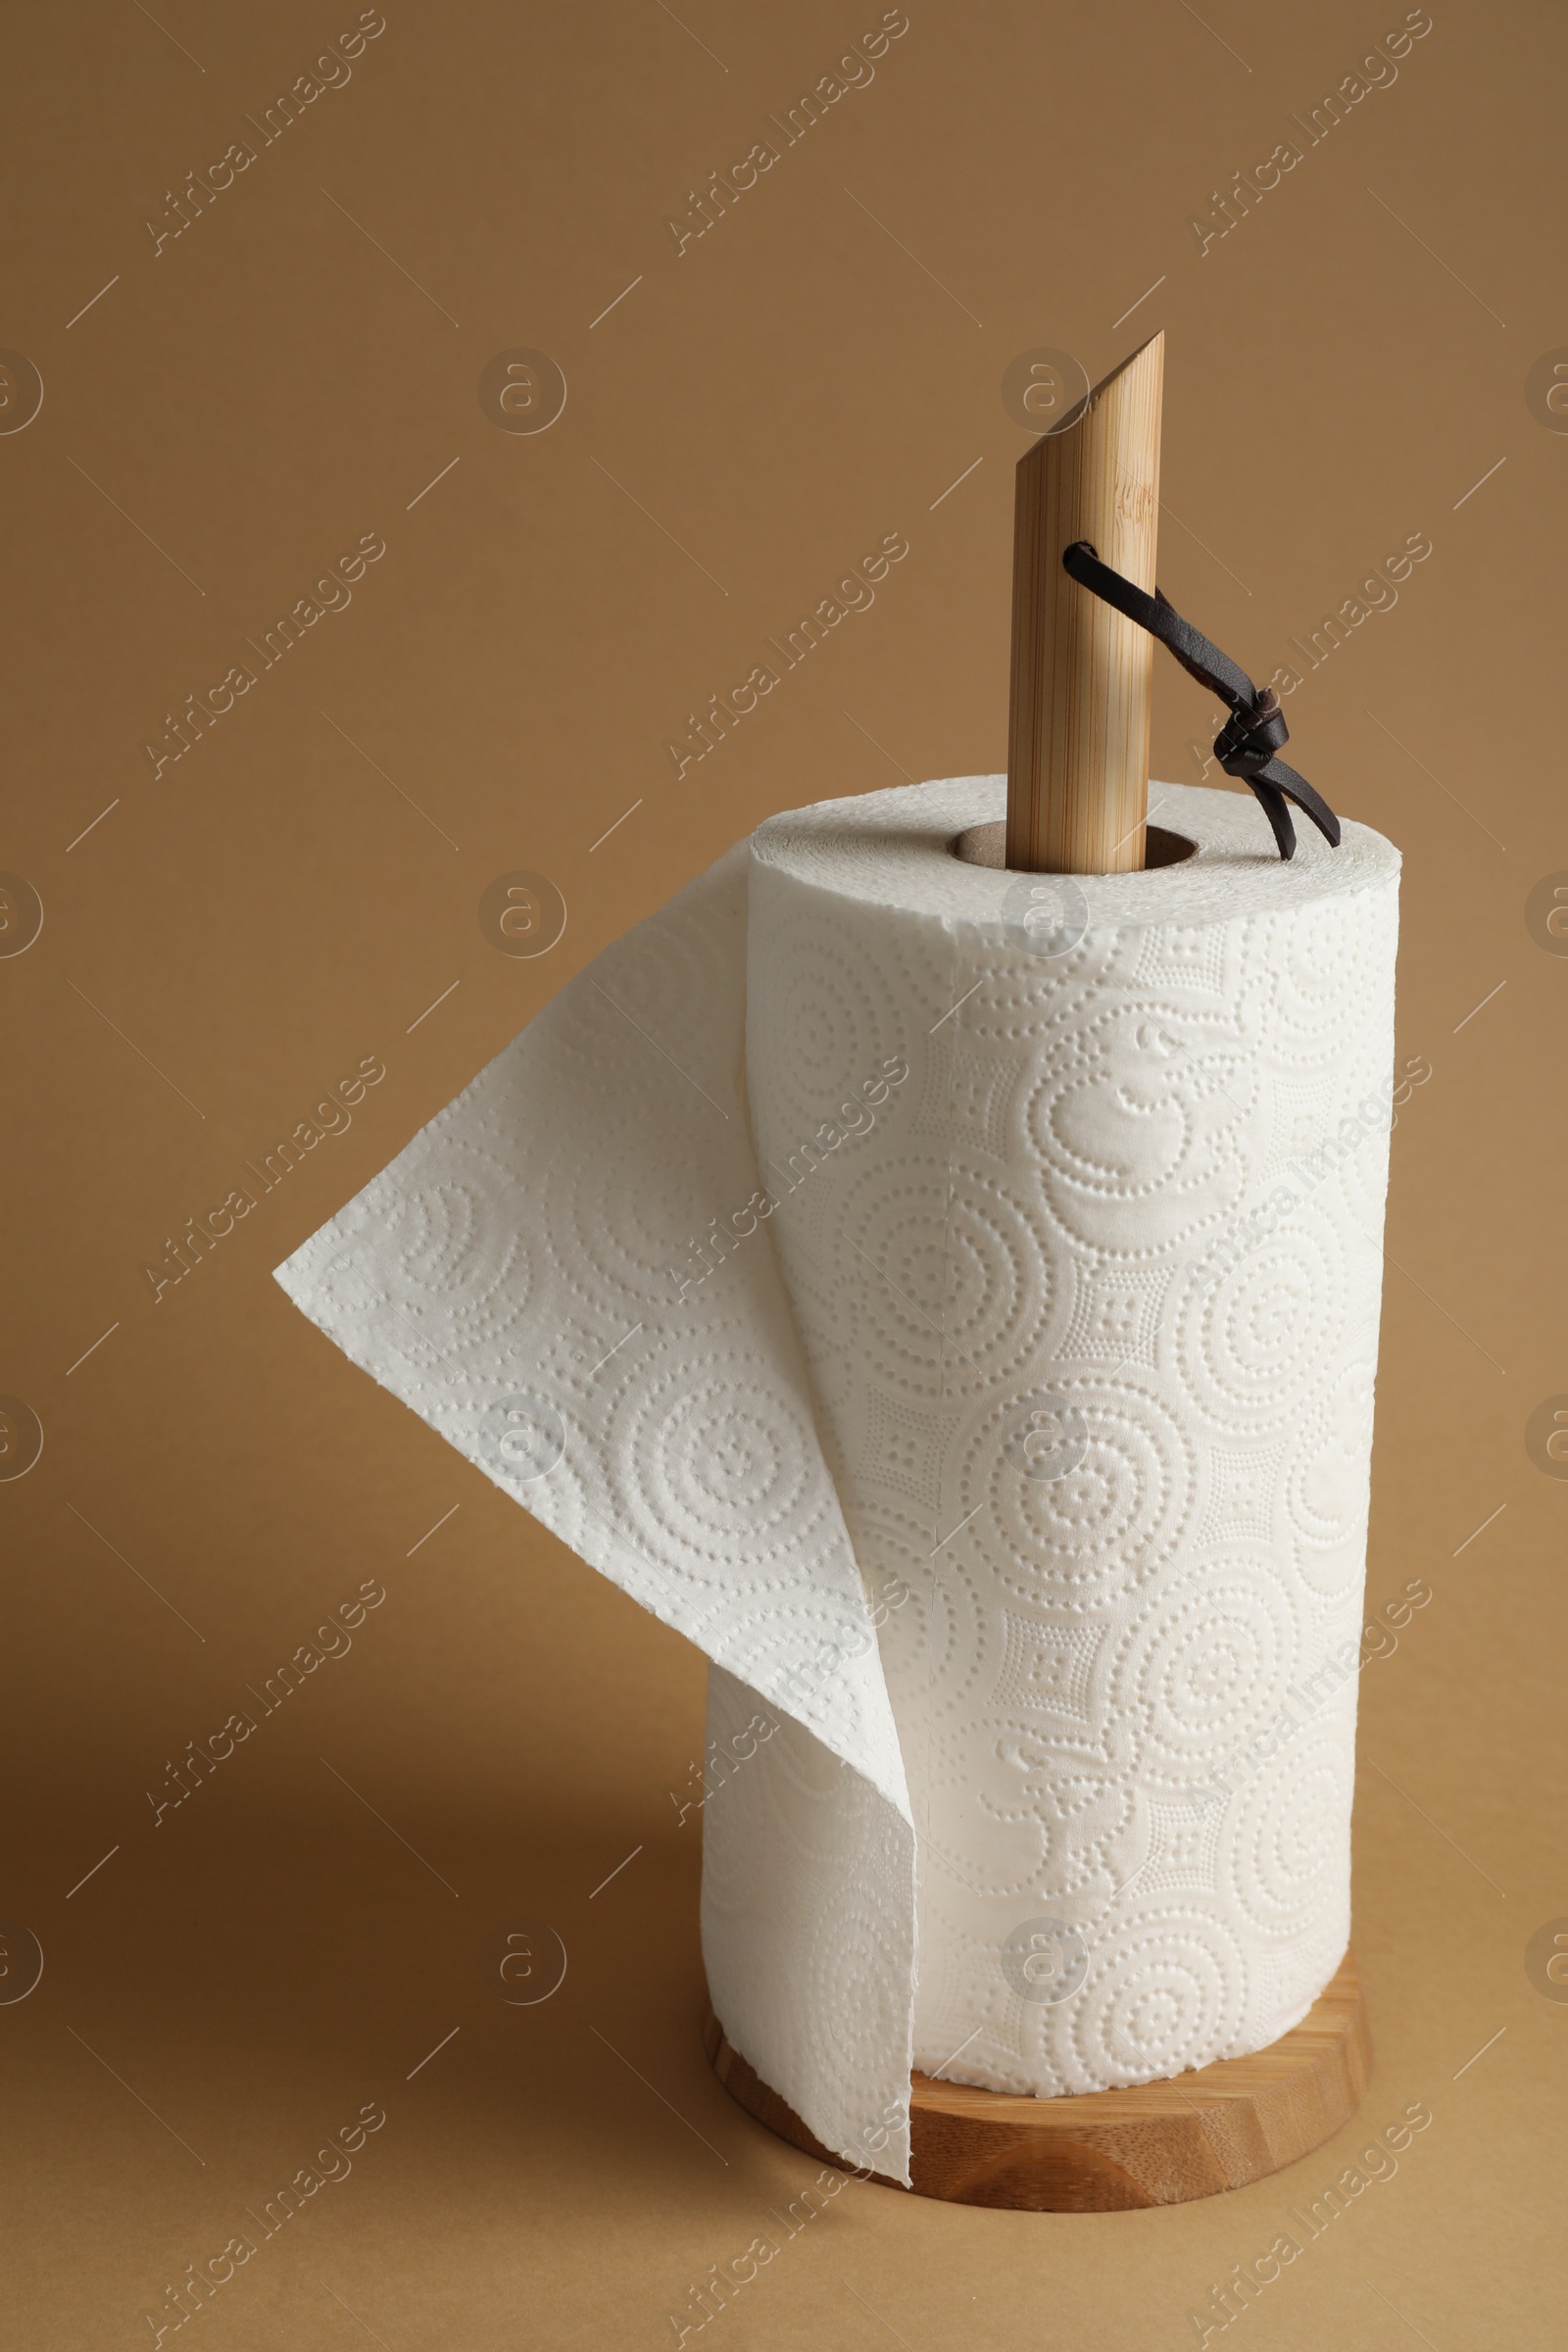 Photo of Holder with roll of white paper towels on brown background